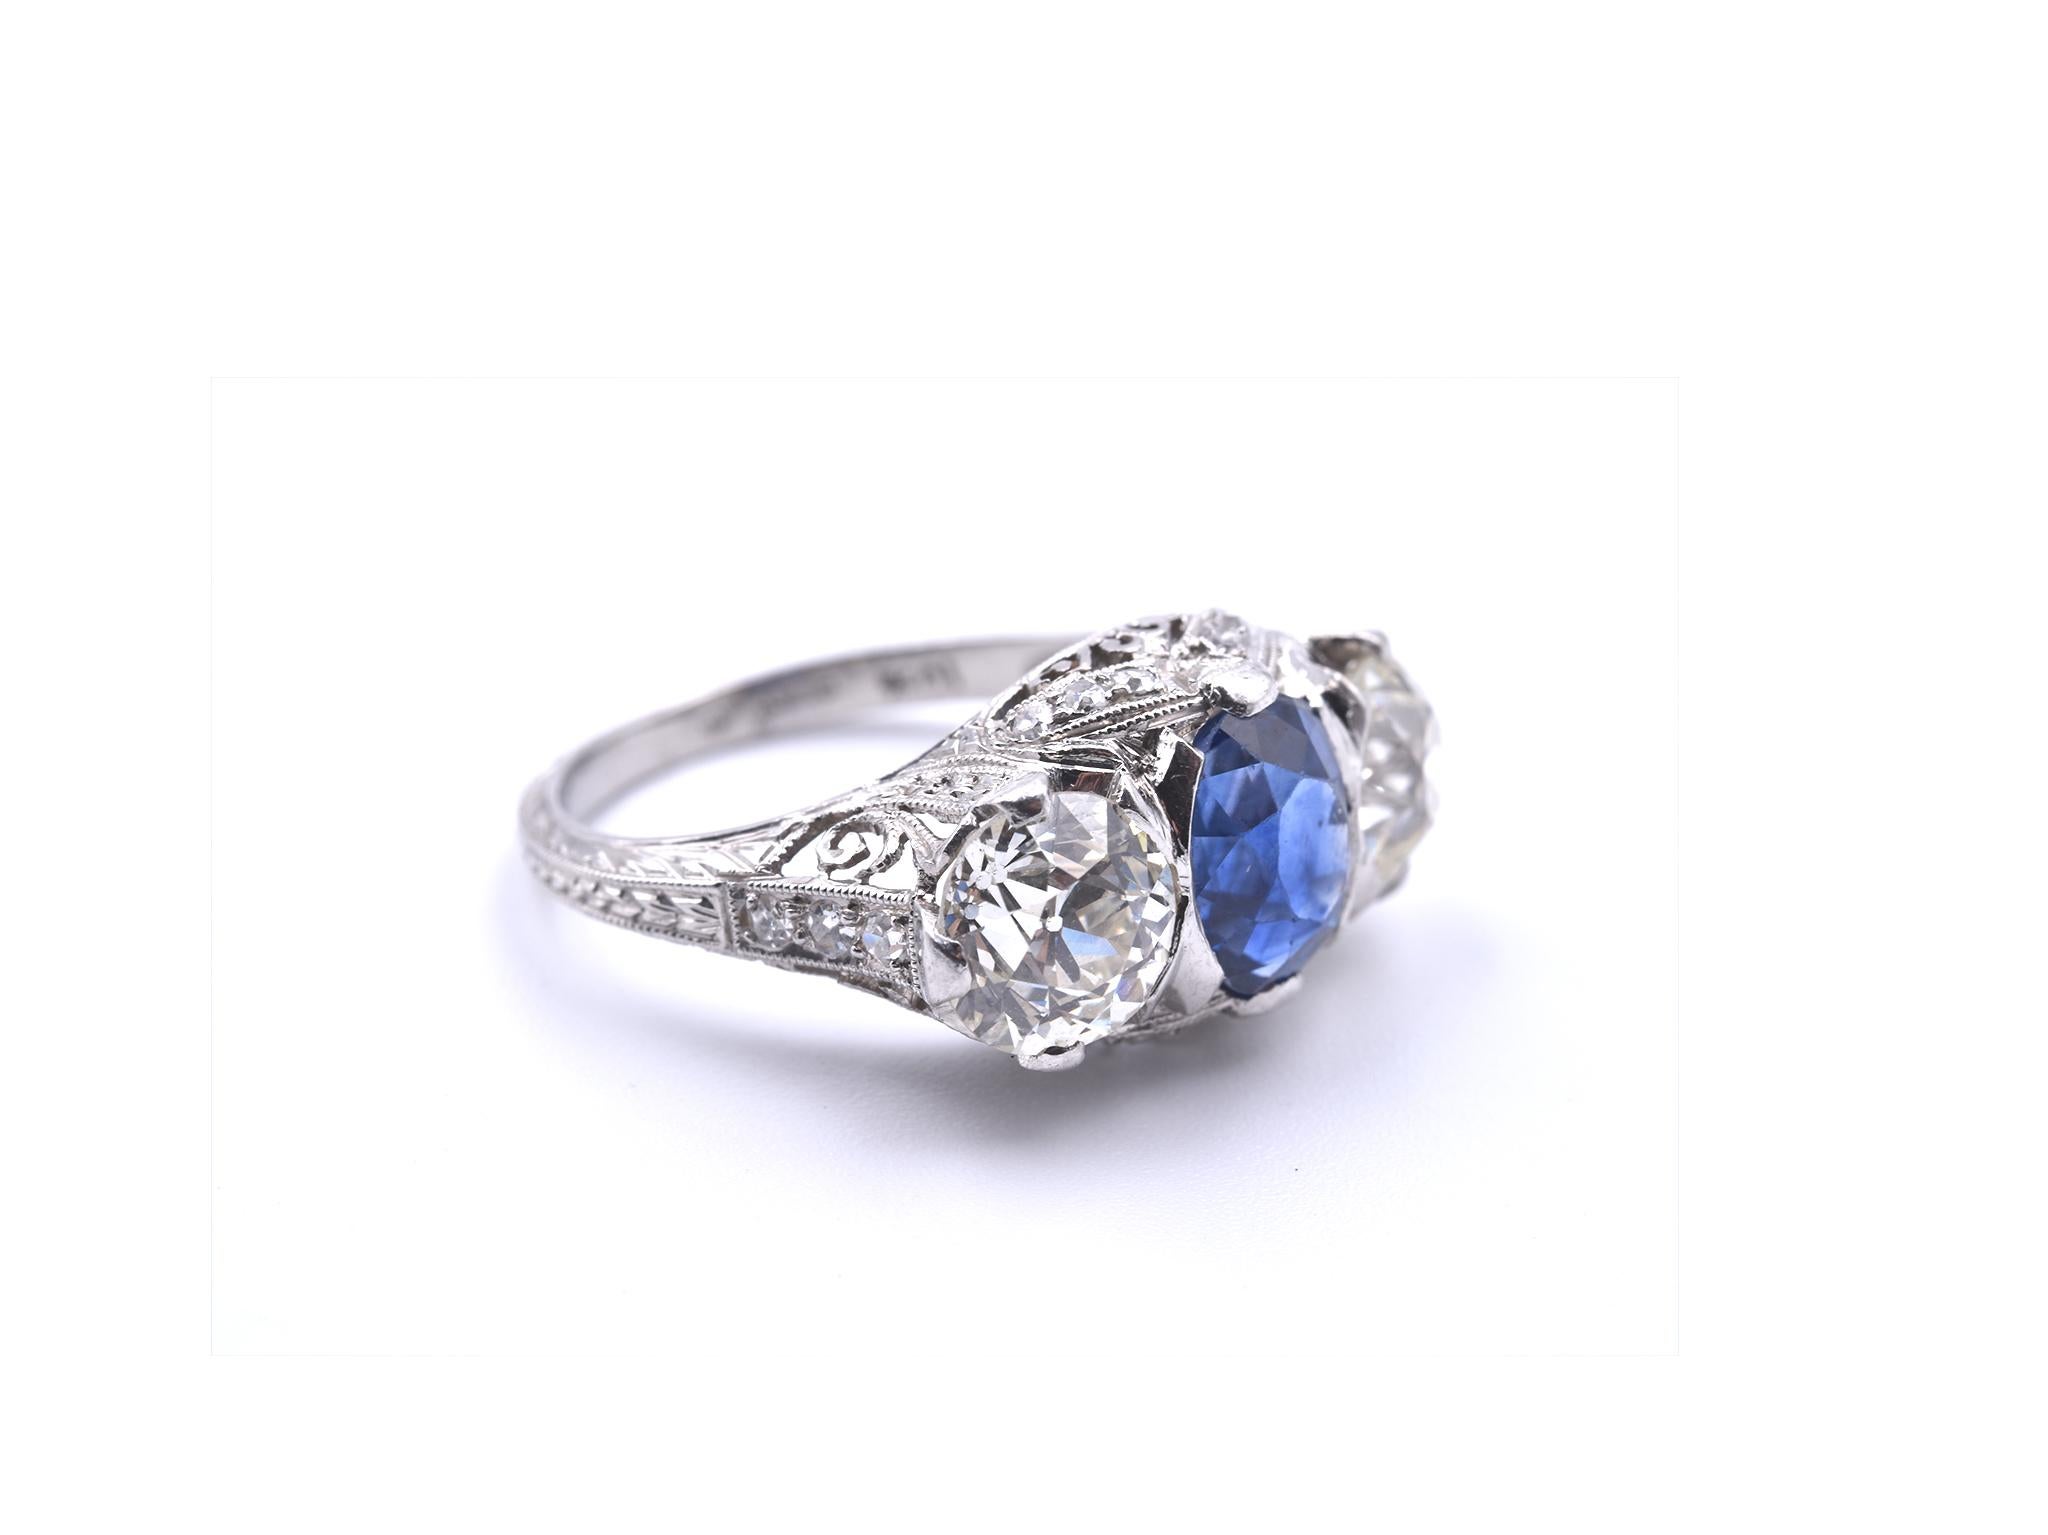 Designer: custom design
Material: platinum
Sapphire: 1 oval faceted cut = 2.25ct
Diamonds:  1 European cut = 1.20ct
Diamonds: 1 European cut= 1.10ct
Color: K
Clarity: VS
Ring Size: 5 ½ (please allow two additional shipping days for sizing